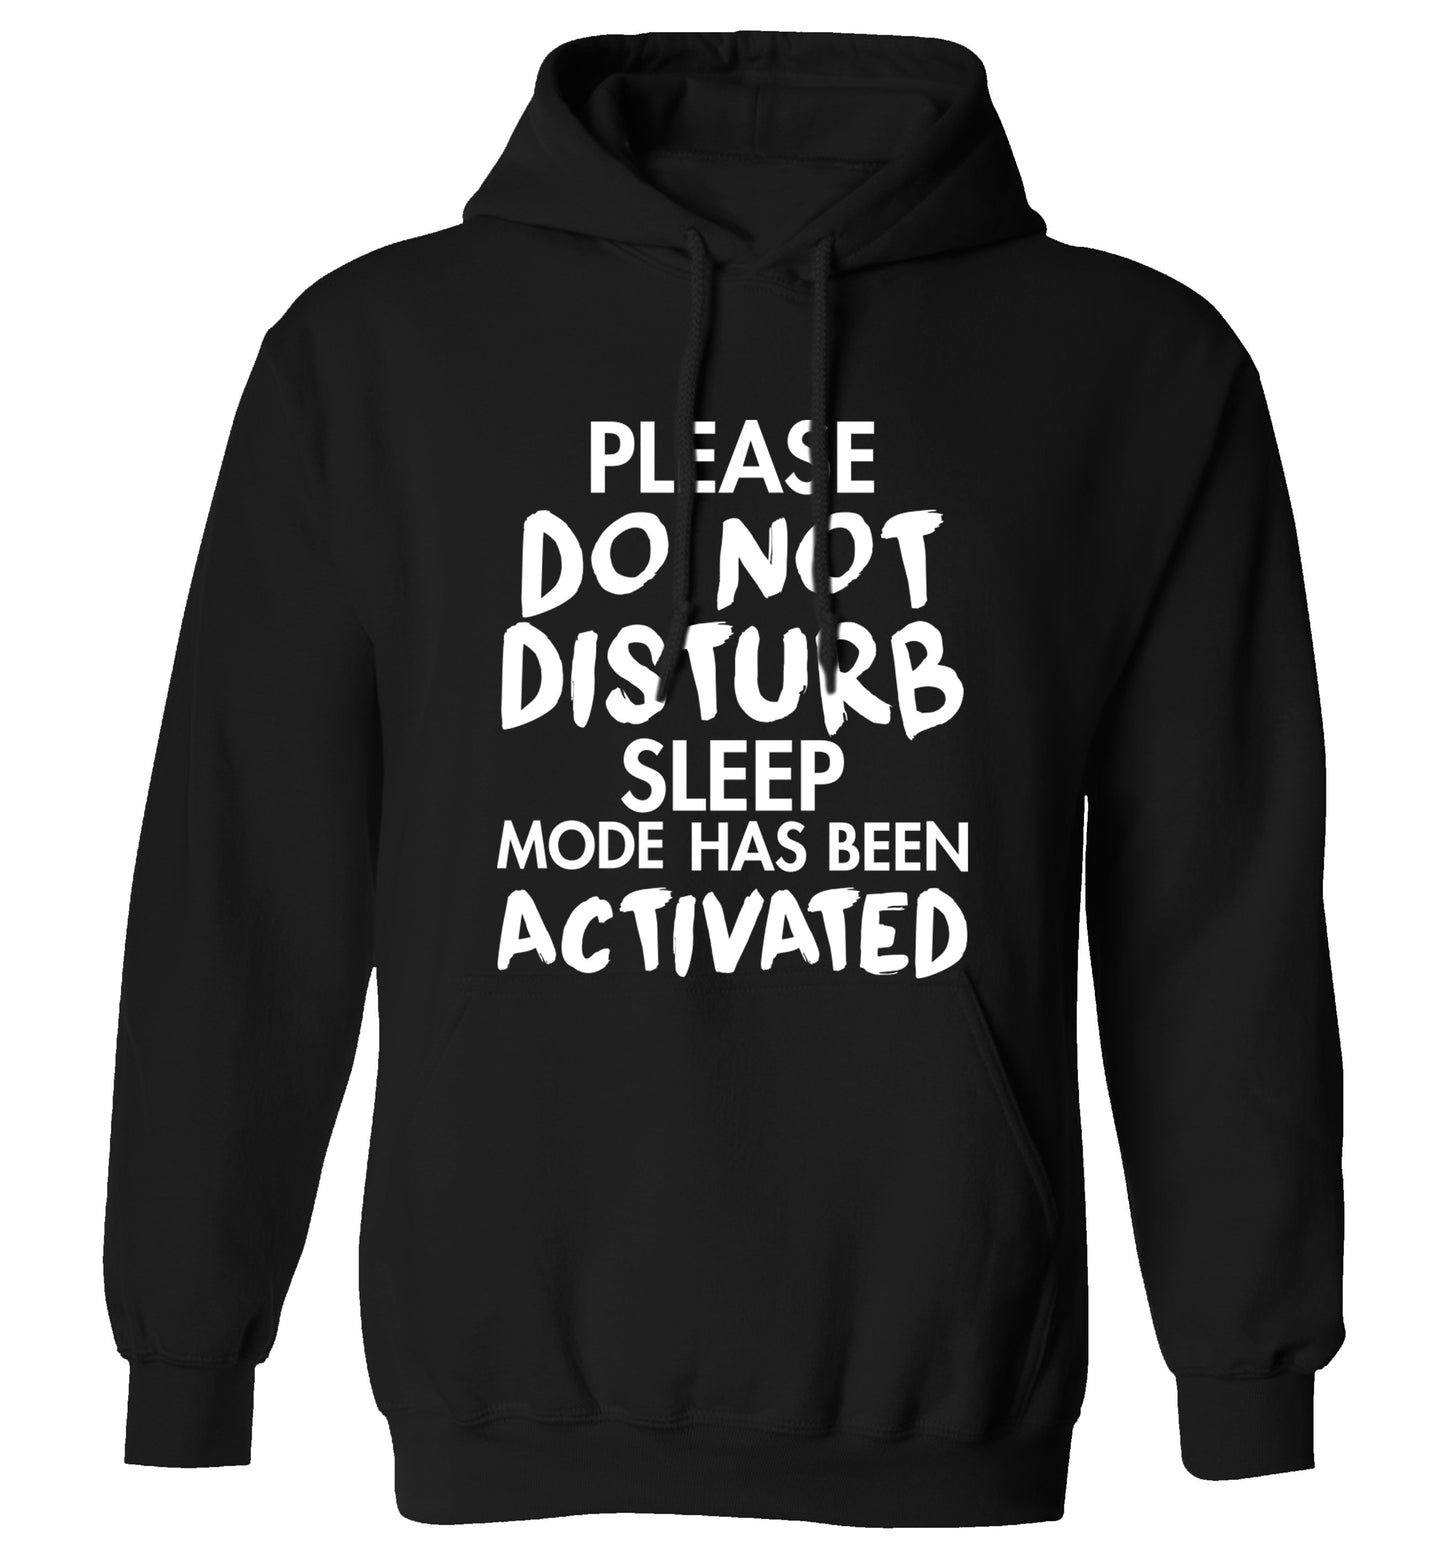 Please do not disturb sleeping mode has been activated adults unisex black hoodie 2XL